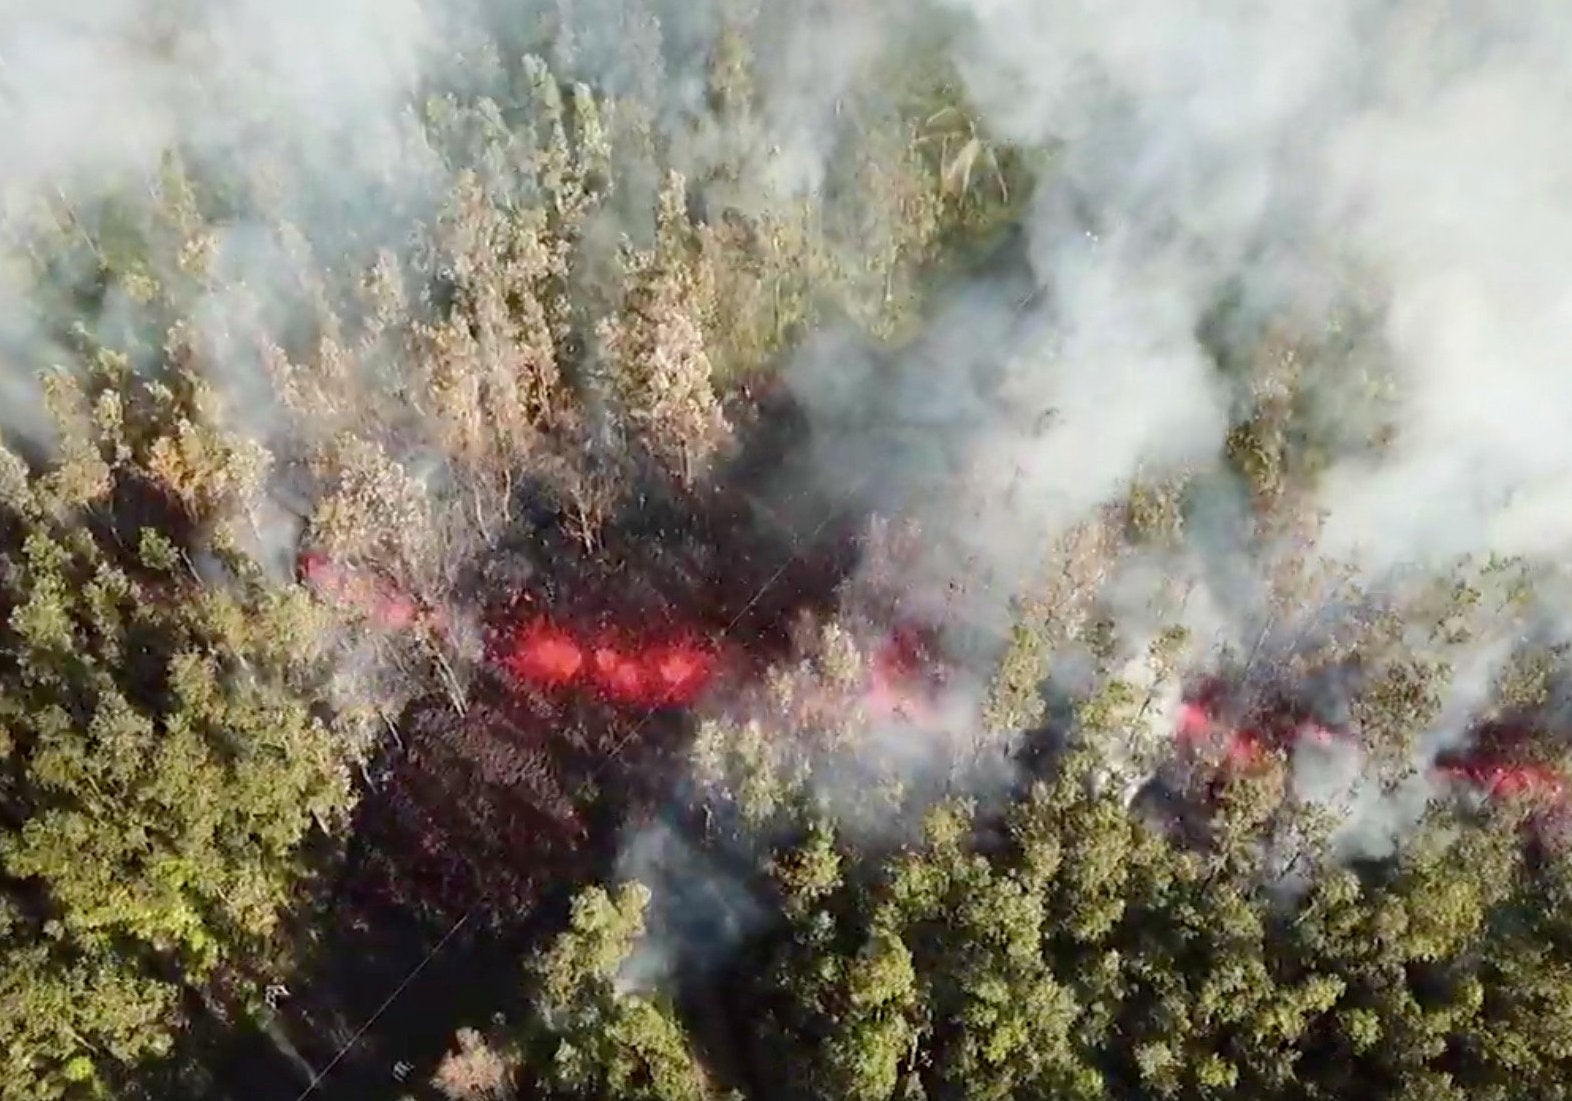 Up to 10,000 people were ordered to evacuate as flows of red lava entered residential areas